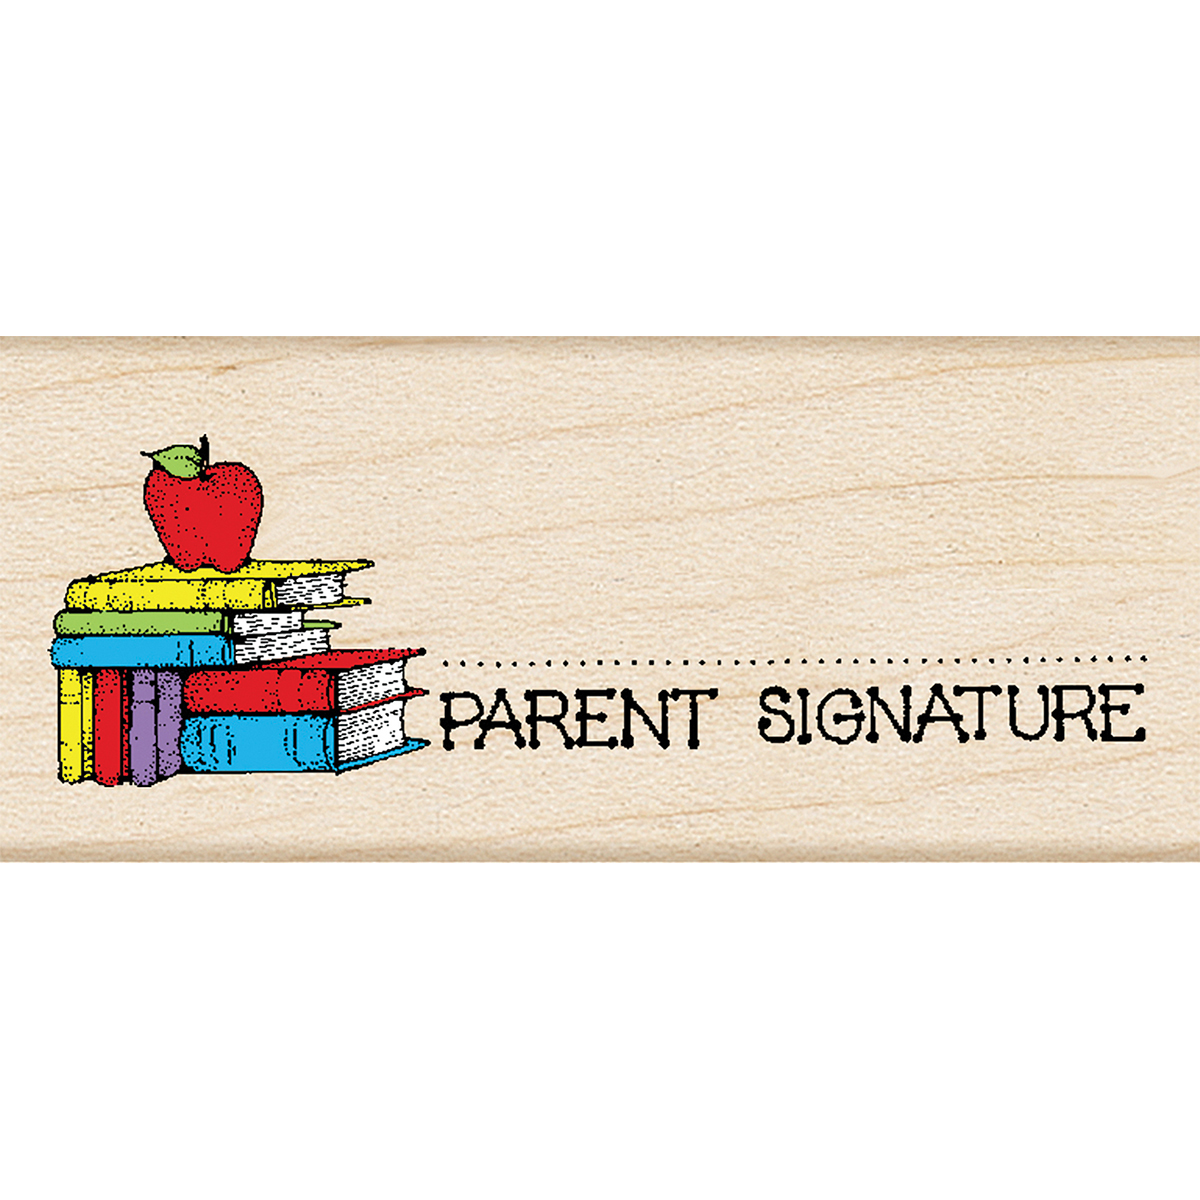 Picture of Hero Arts HA-D323 1 x 2.5 in. Hero Arts Mounted Rubber Stamp - Parent Signature with Apple